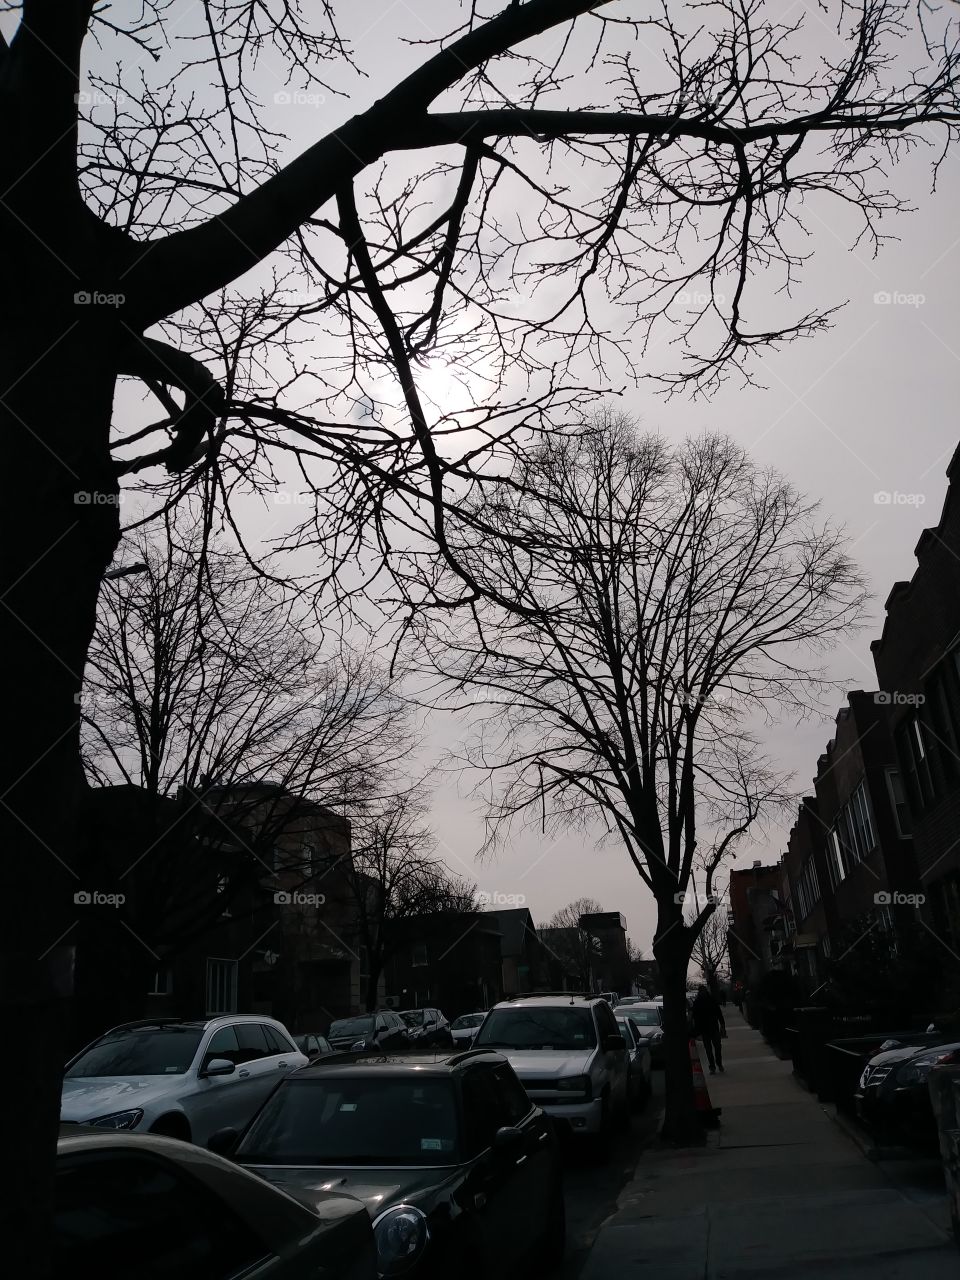 trees on a city street with the sun rising